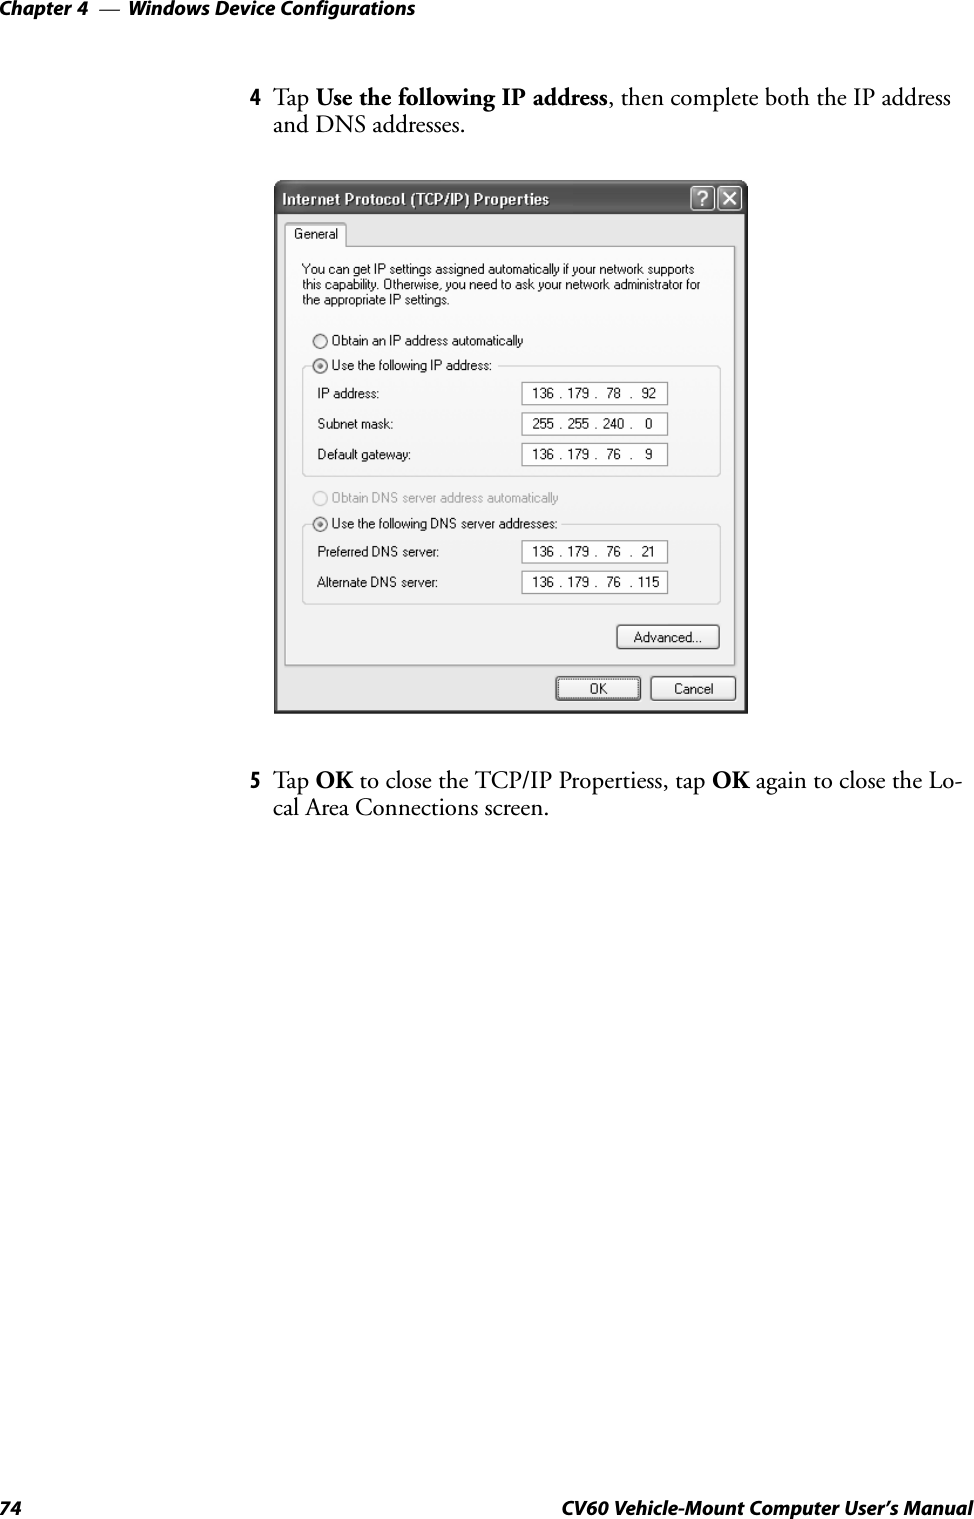 Windows Device ConfigurationsChapter  —474 CV60 Vehicle-Mount Computer User&apos;s Manual4Ta p  Use the following IP address, then complete both the IP addressand DNS addresses.5Tap OK to close the TCP/IP Propertiess, tap OK again to close the LoĆcal Area Connections screen.